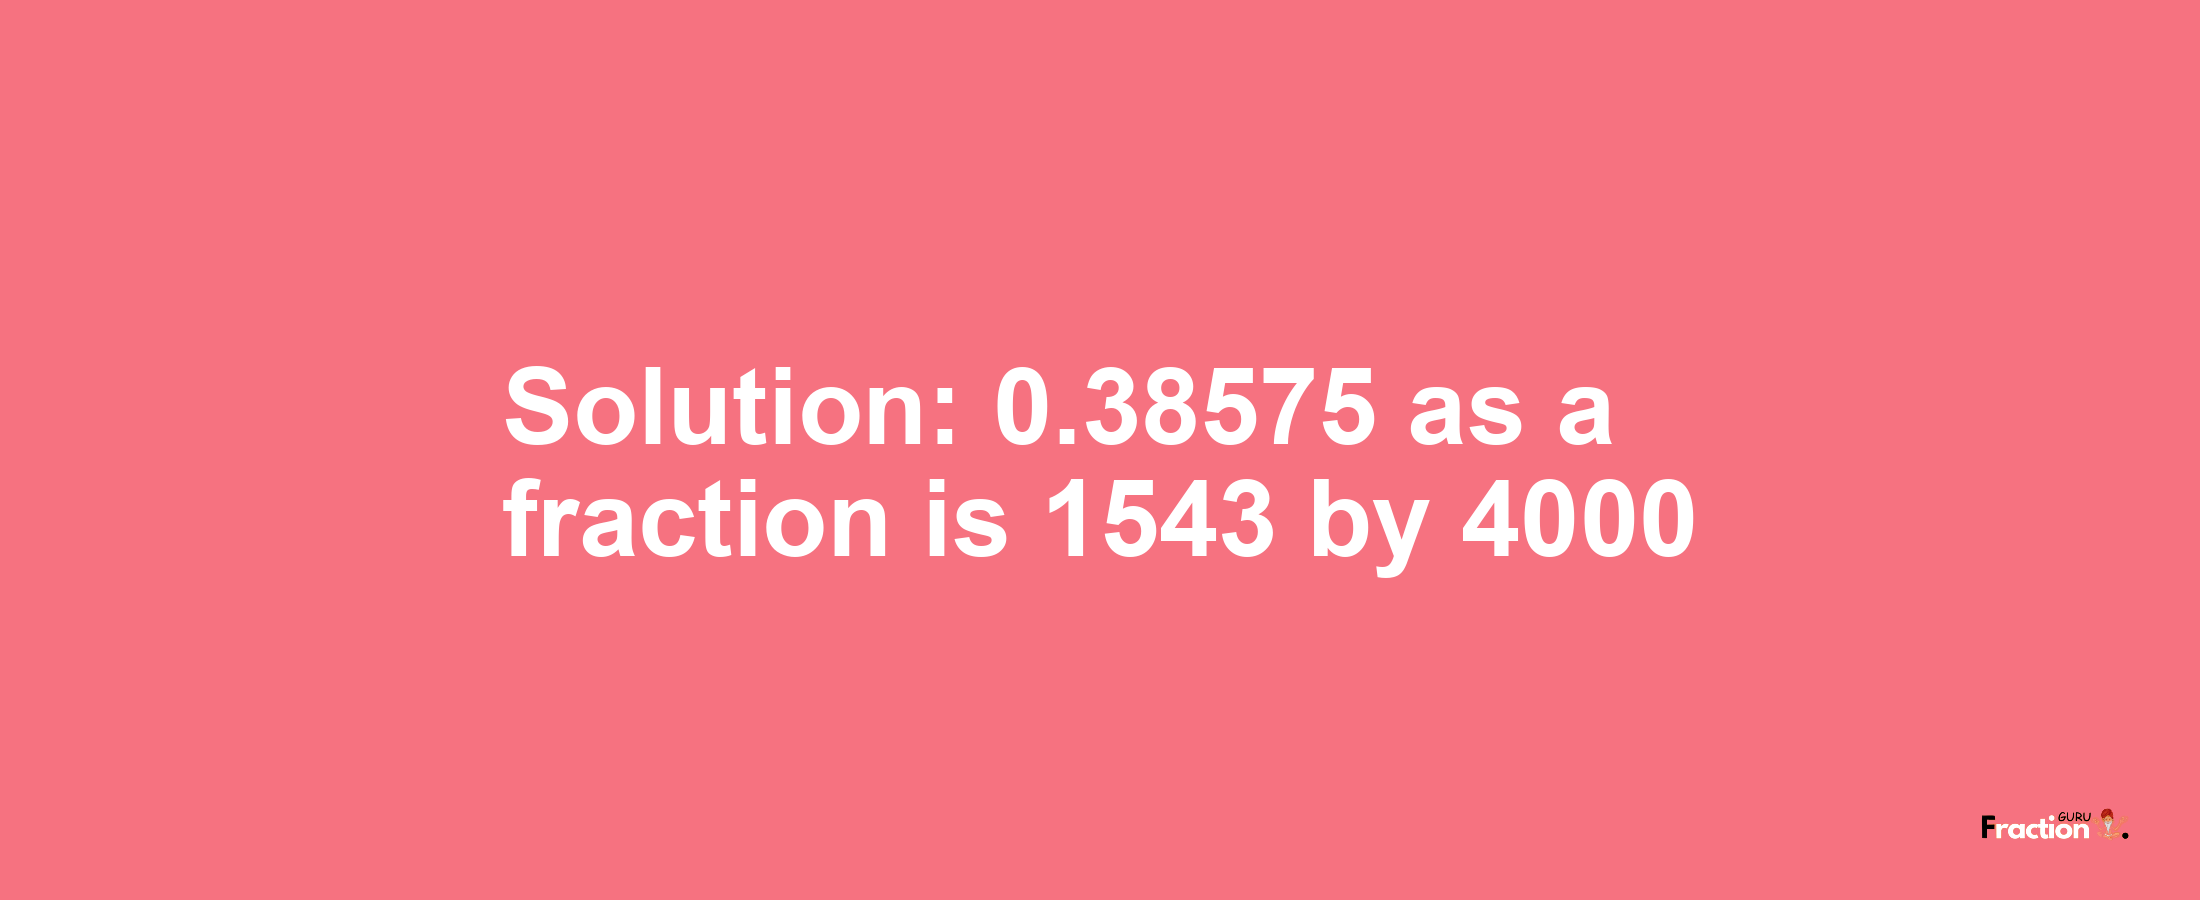 Solution:0.38575 as a fraction is 1543/4000